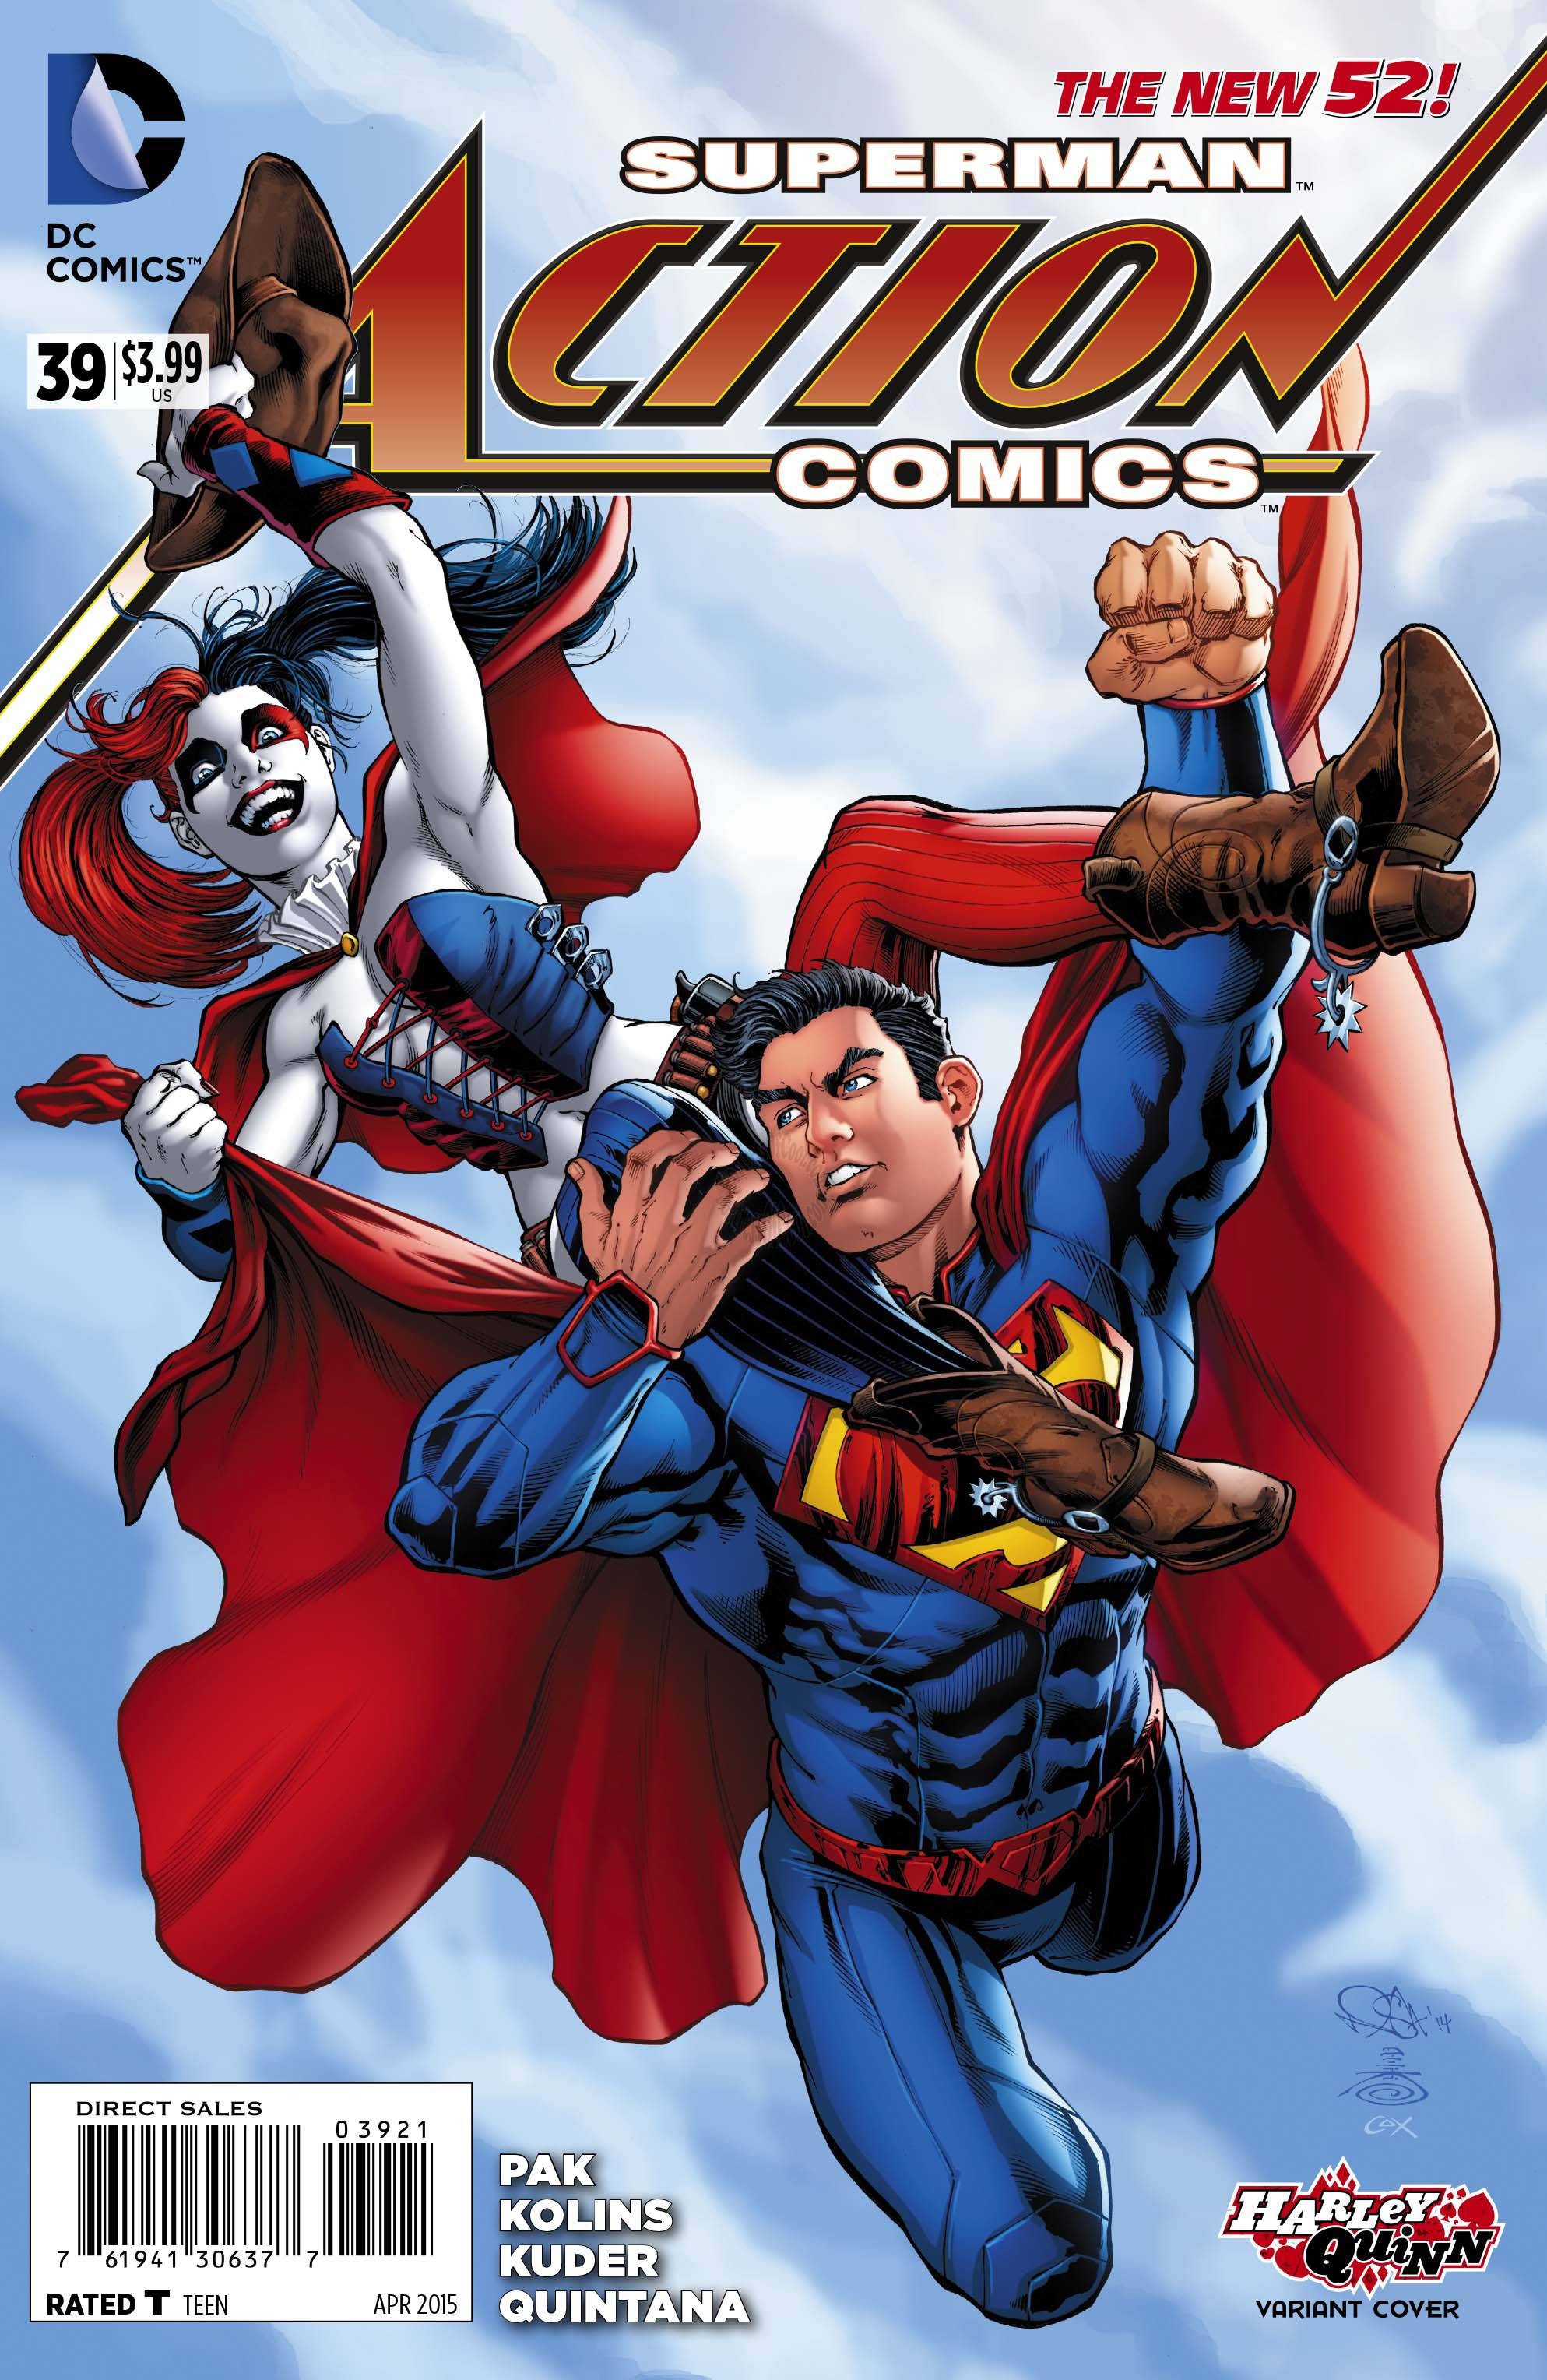 Action Comics #39 (Harley Quinn Variant Cover)